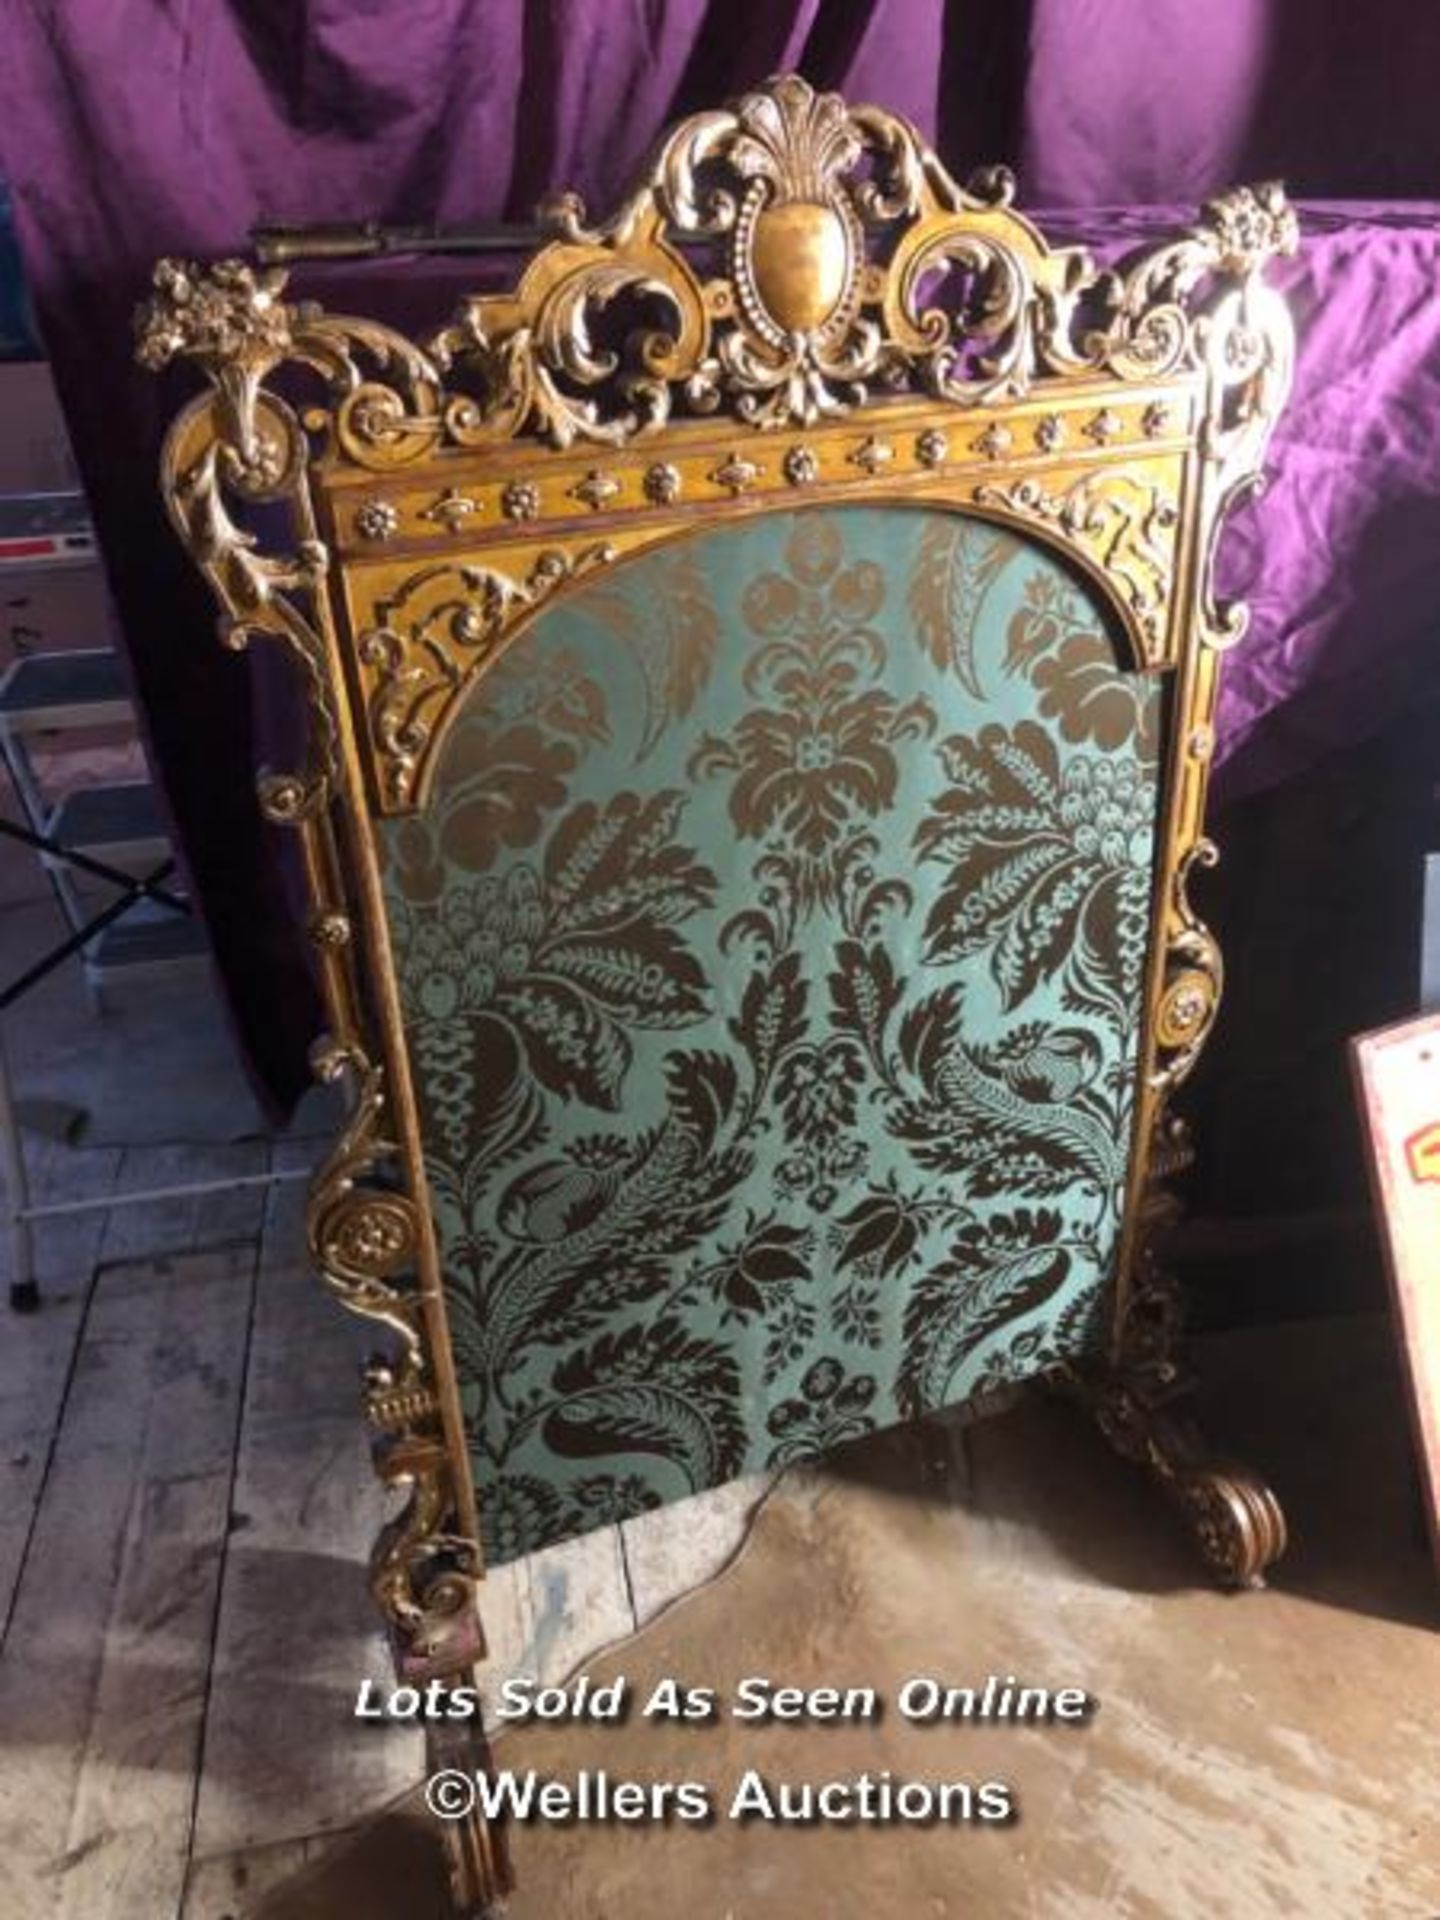 LARGE AND IMPRESSIVE FIRE SCREEN, ITALIAN ORIGIN, WITH EXTENSIVE CARVING AND GILDING, 88 X 40 X - Bild 4 aus 9